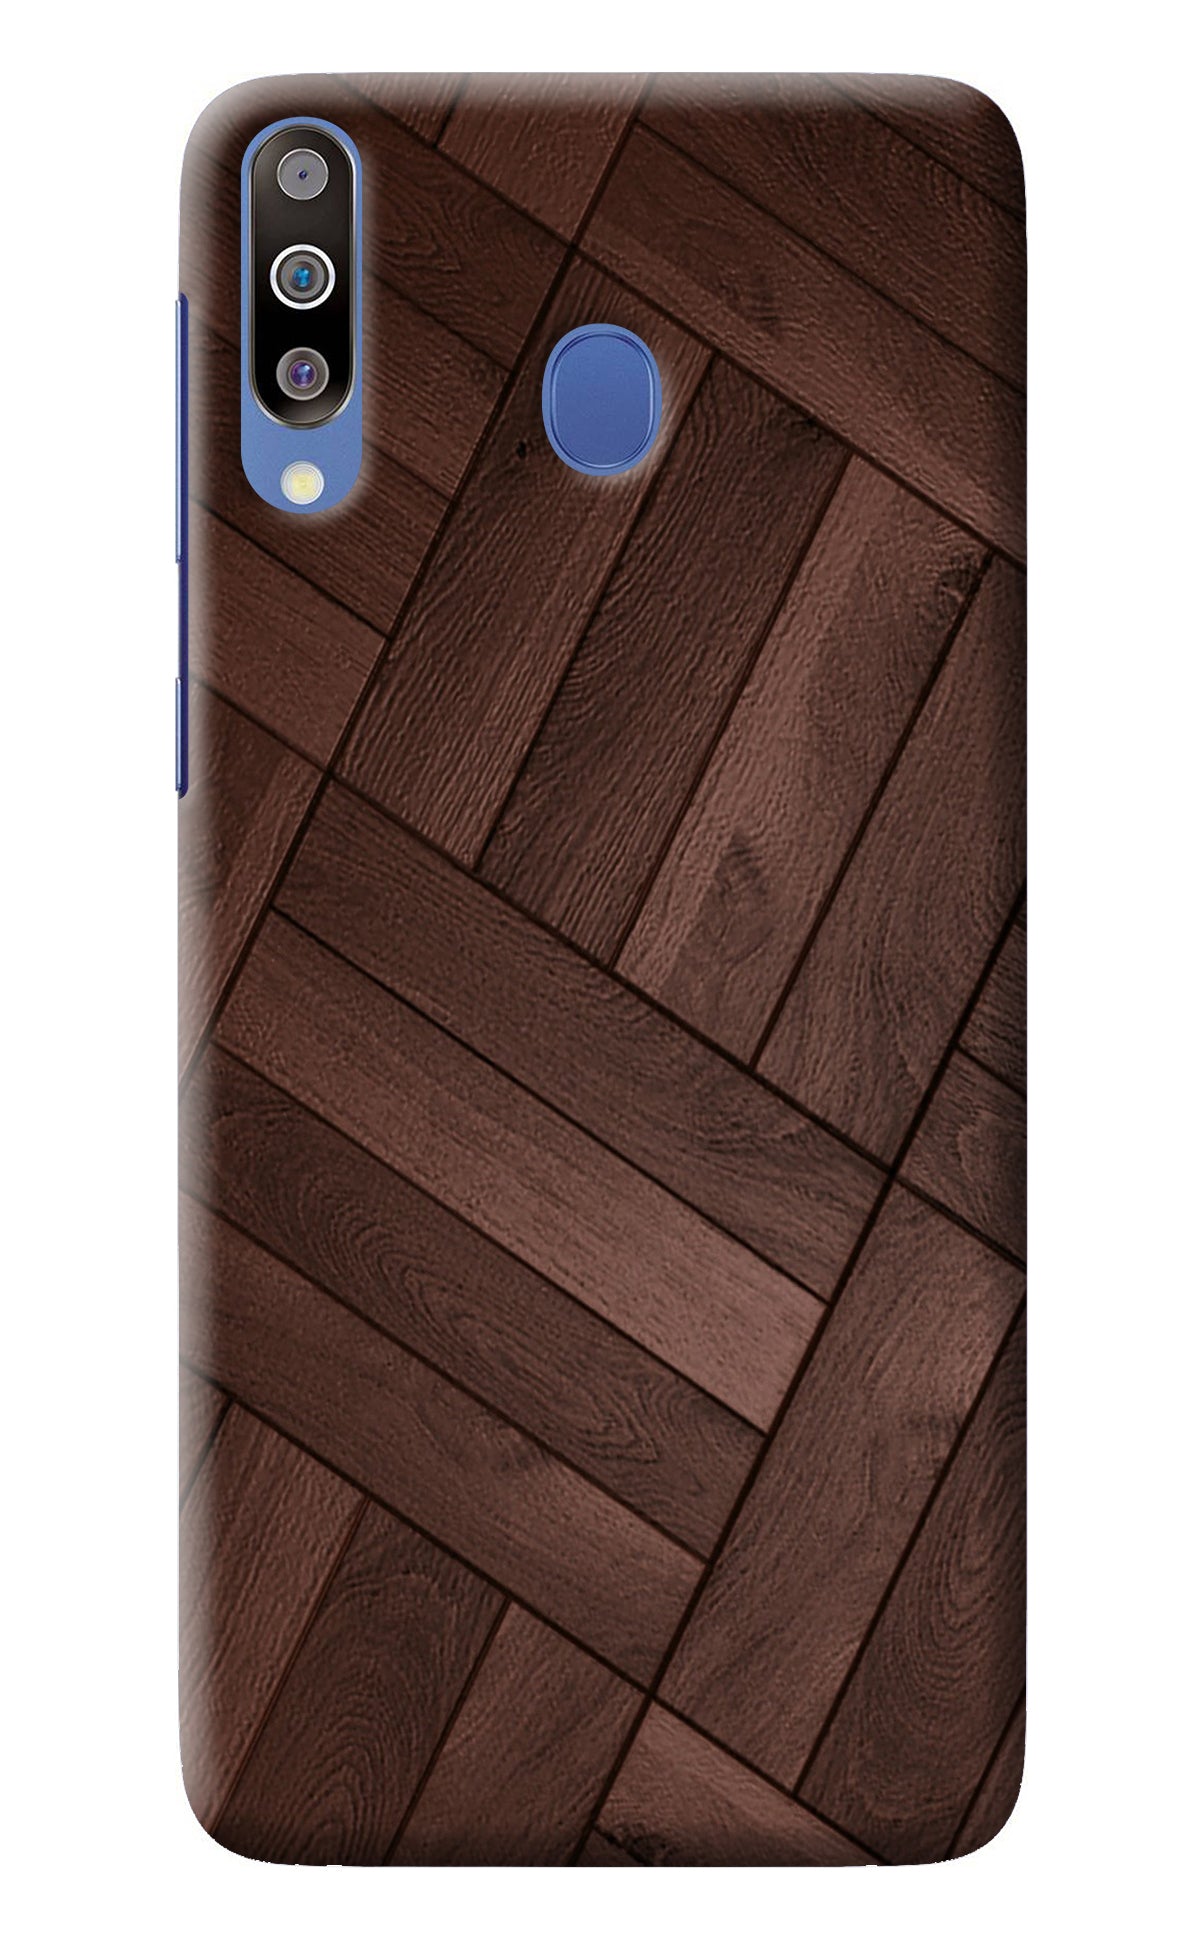 Wooden Texture Design Samsung M30/A40s Back Cover